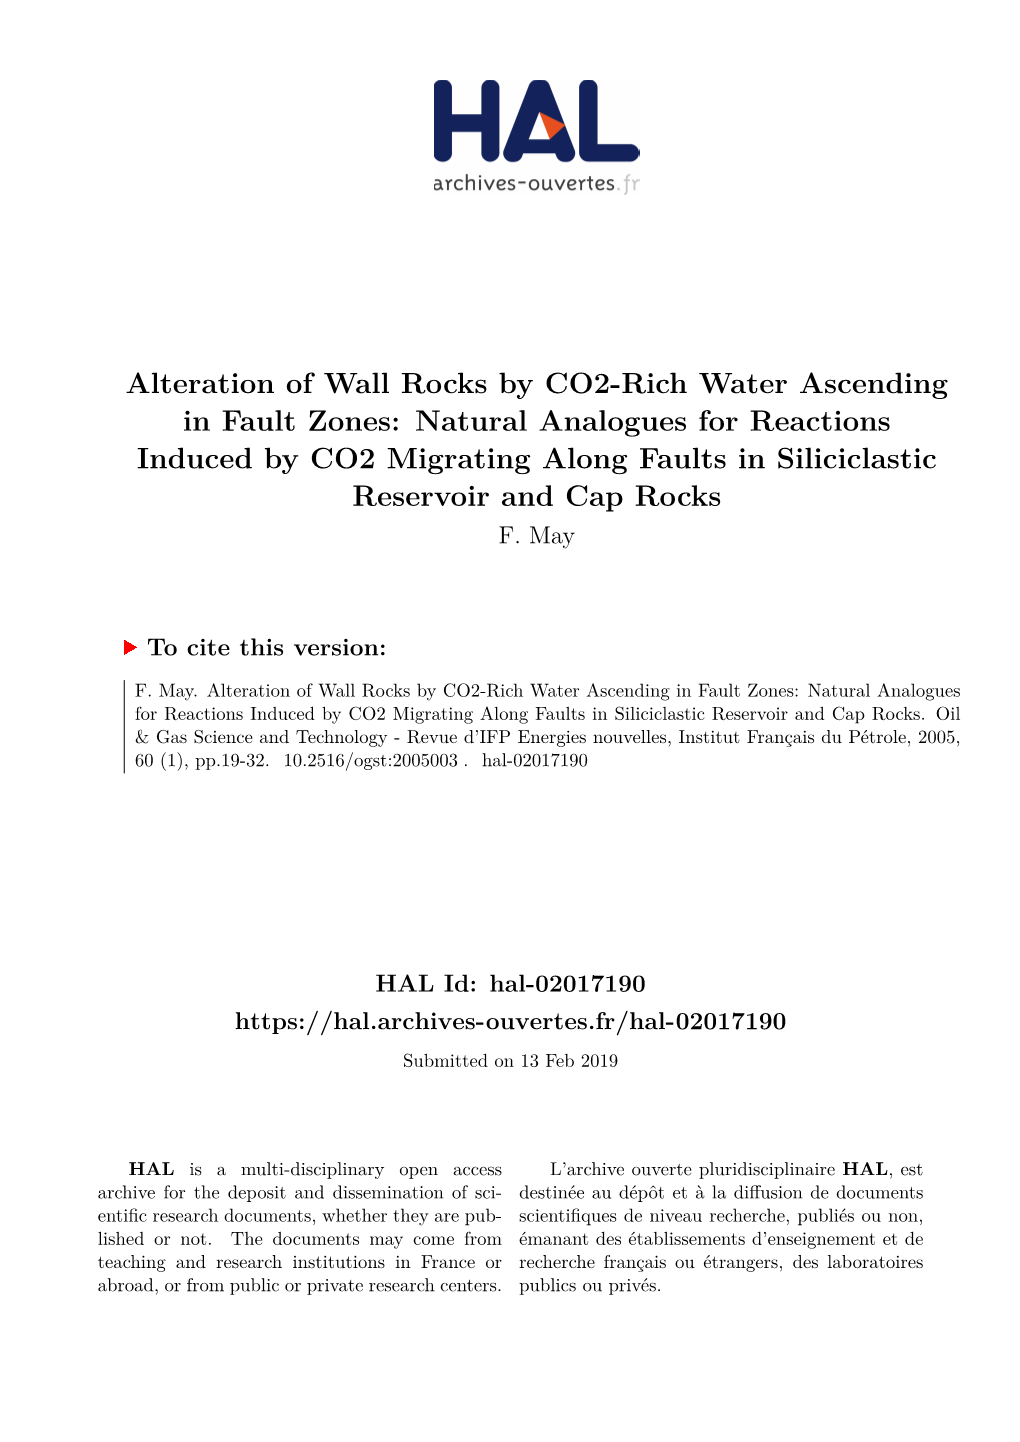 Alteration of Wall Rocks by CO2-Rich Water